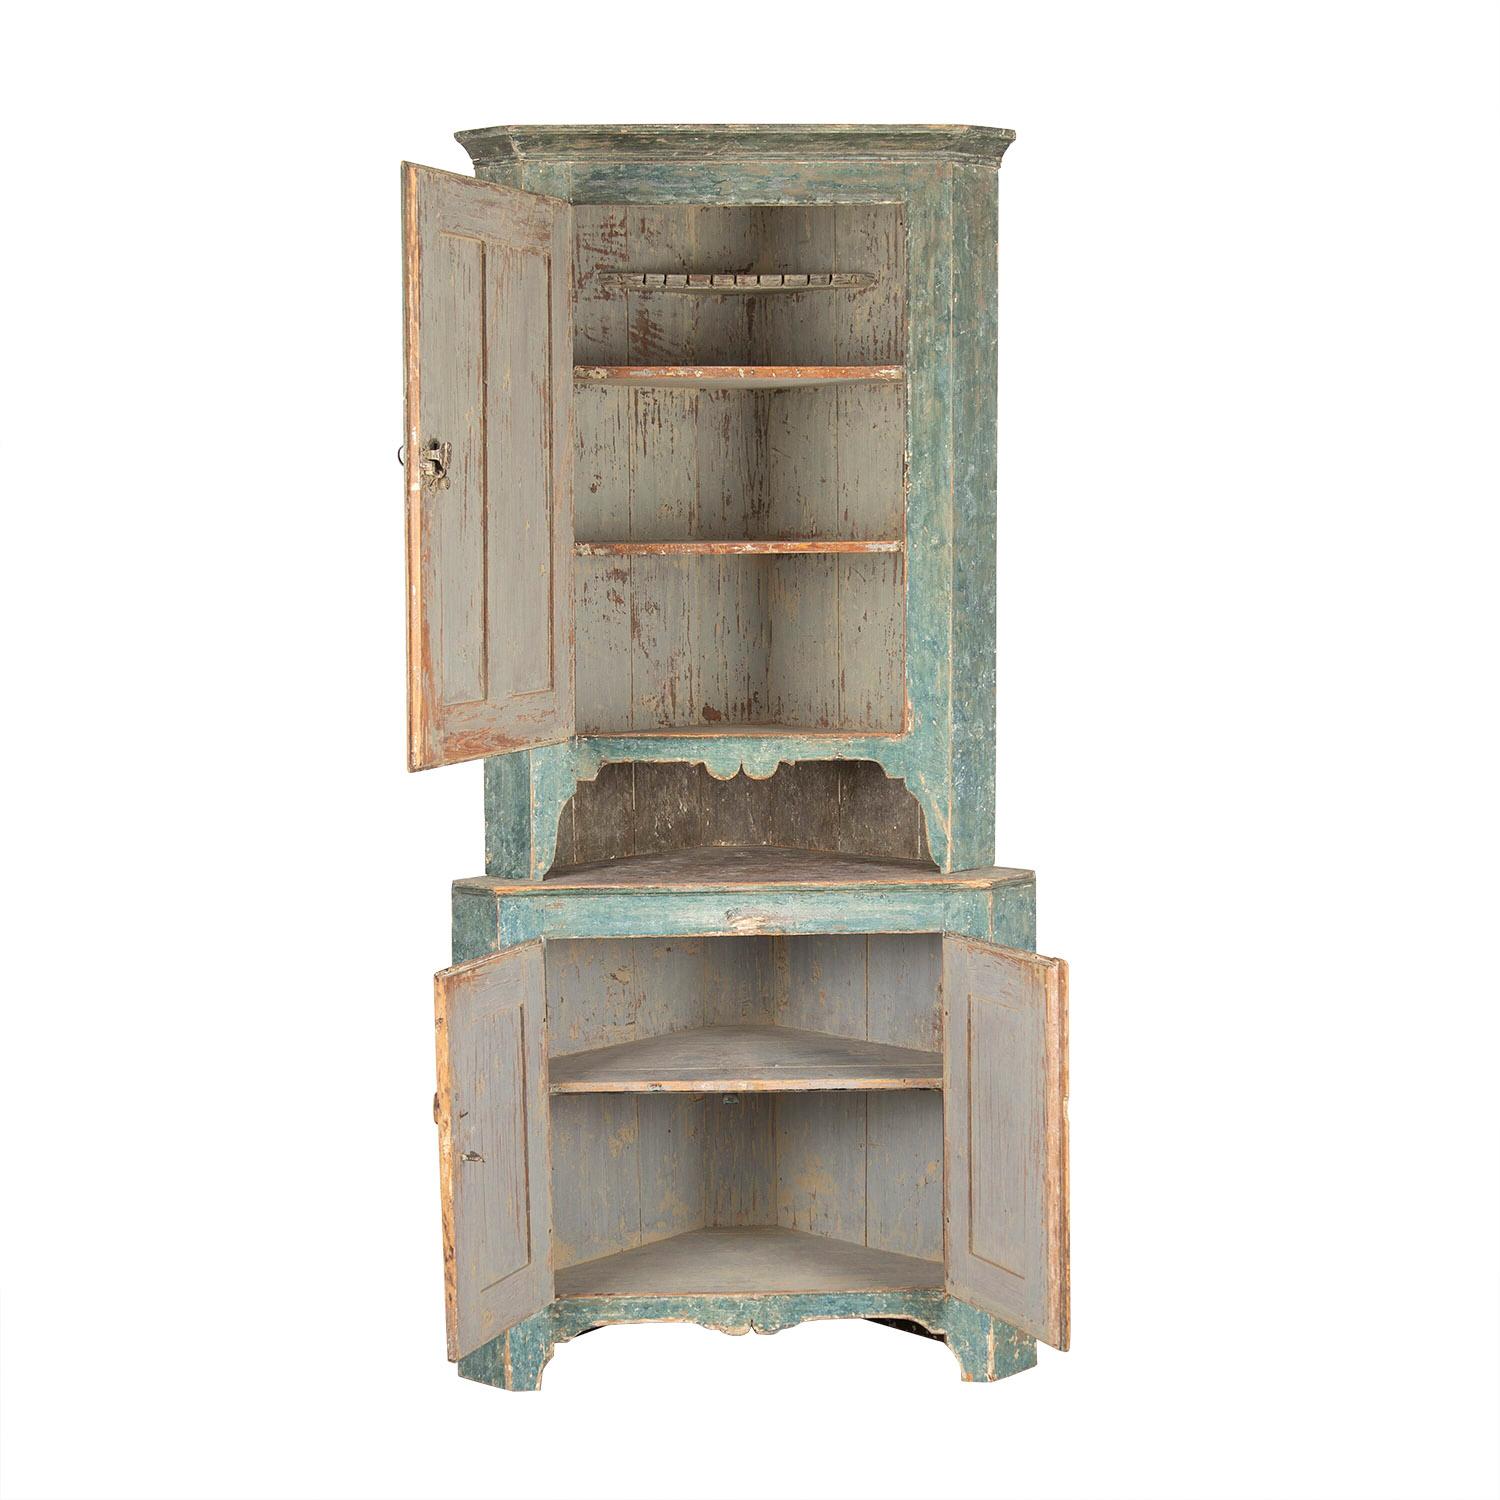 Folk Art corner cabinet from the region of Narke. This piece has original paint colour both inside and out. A large single carved front door opens to storage, below two further carved doors open to further storage.